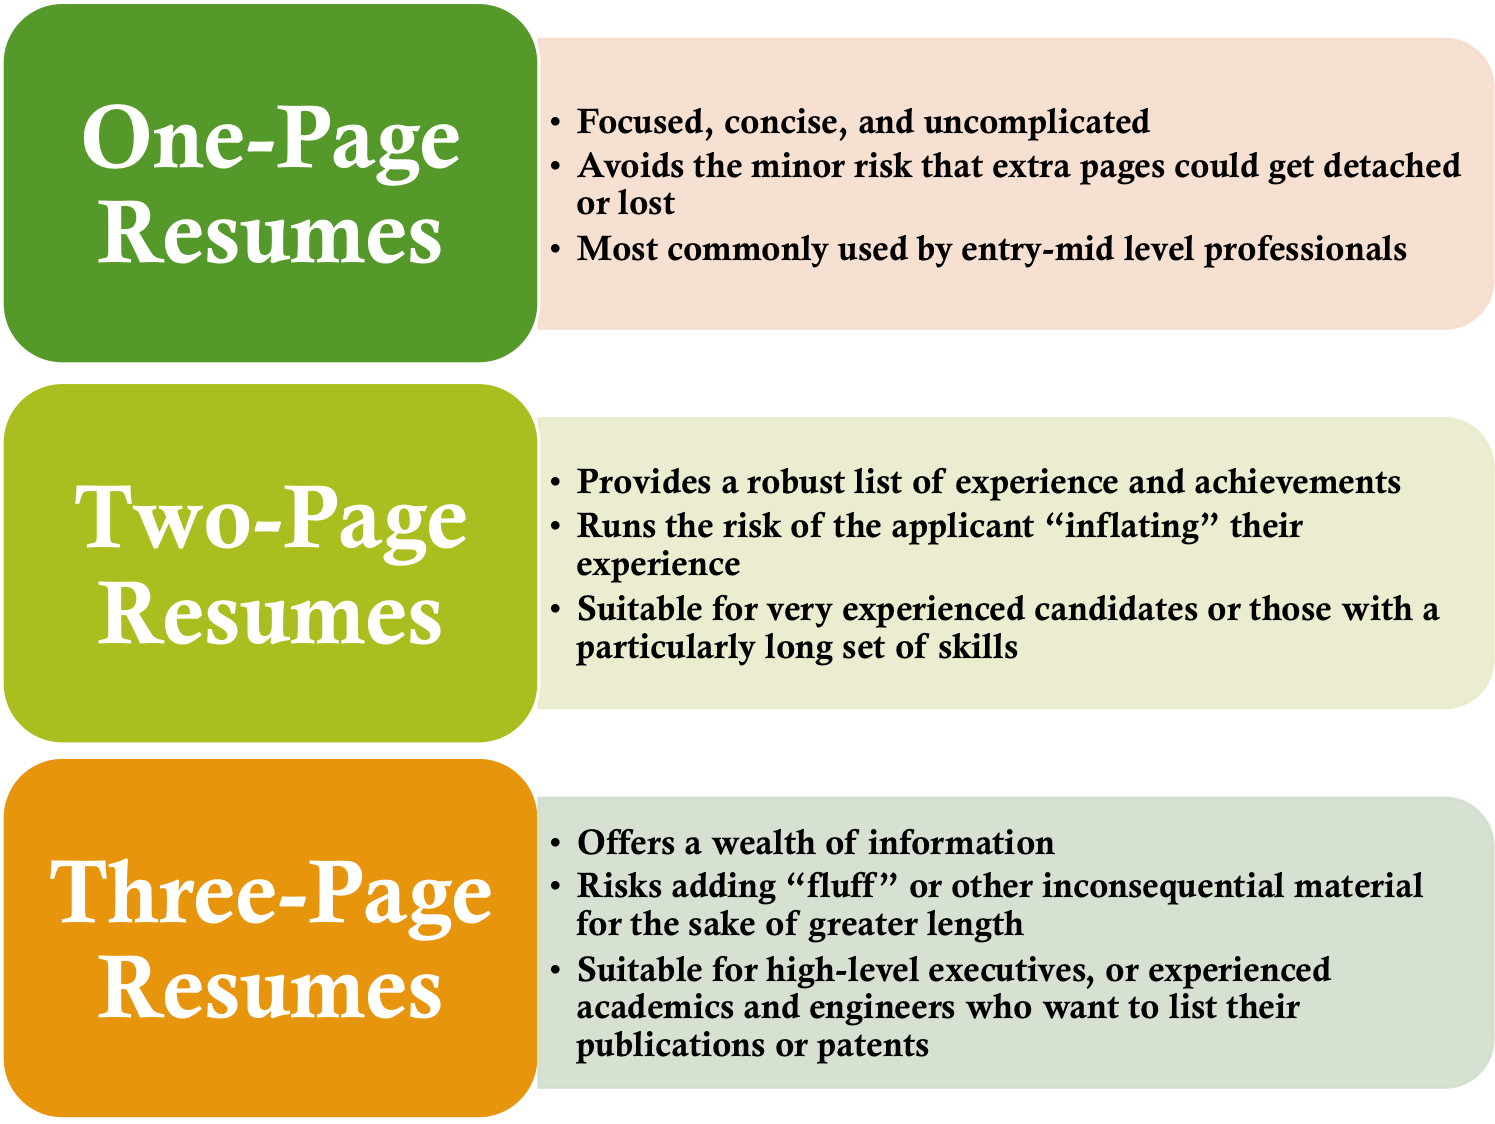 Resume Aesthetics, Font, Margins and Paper Guidelines ...